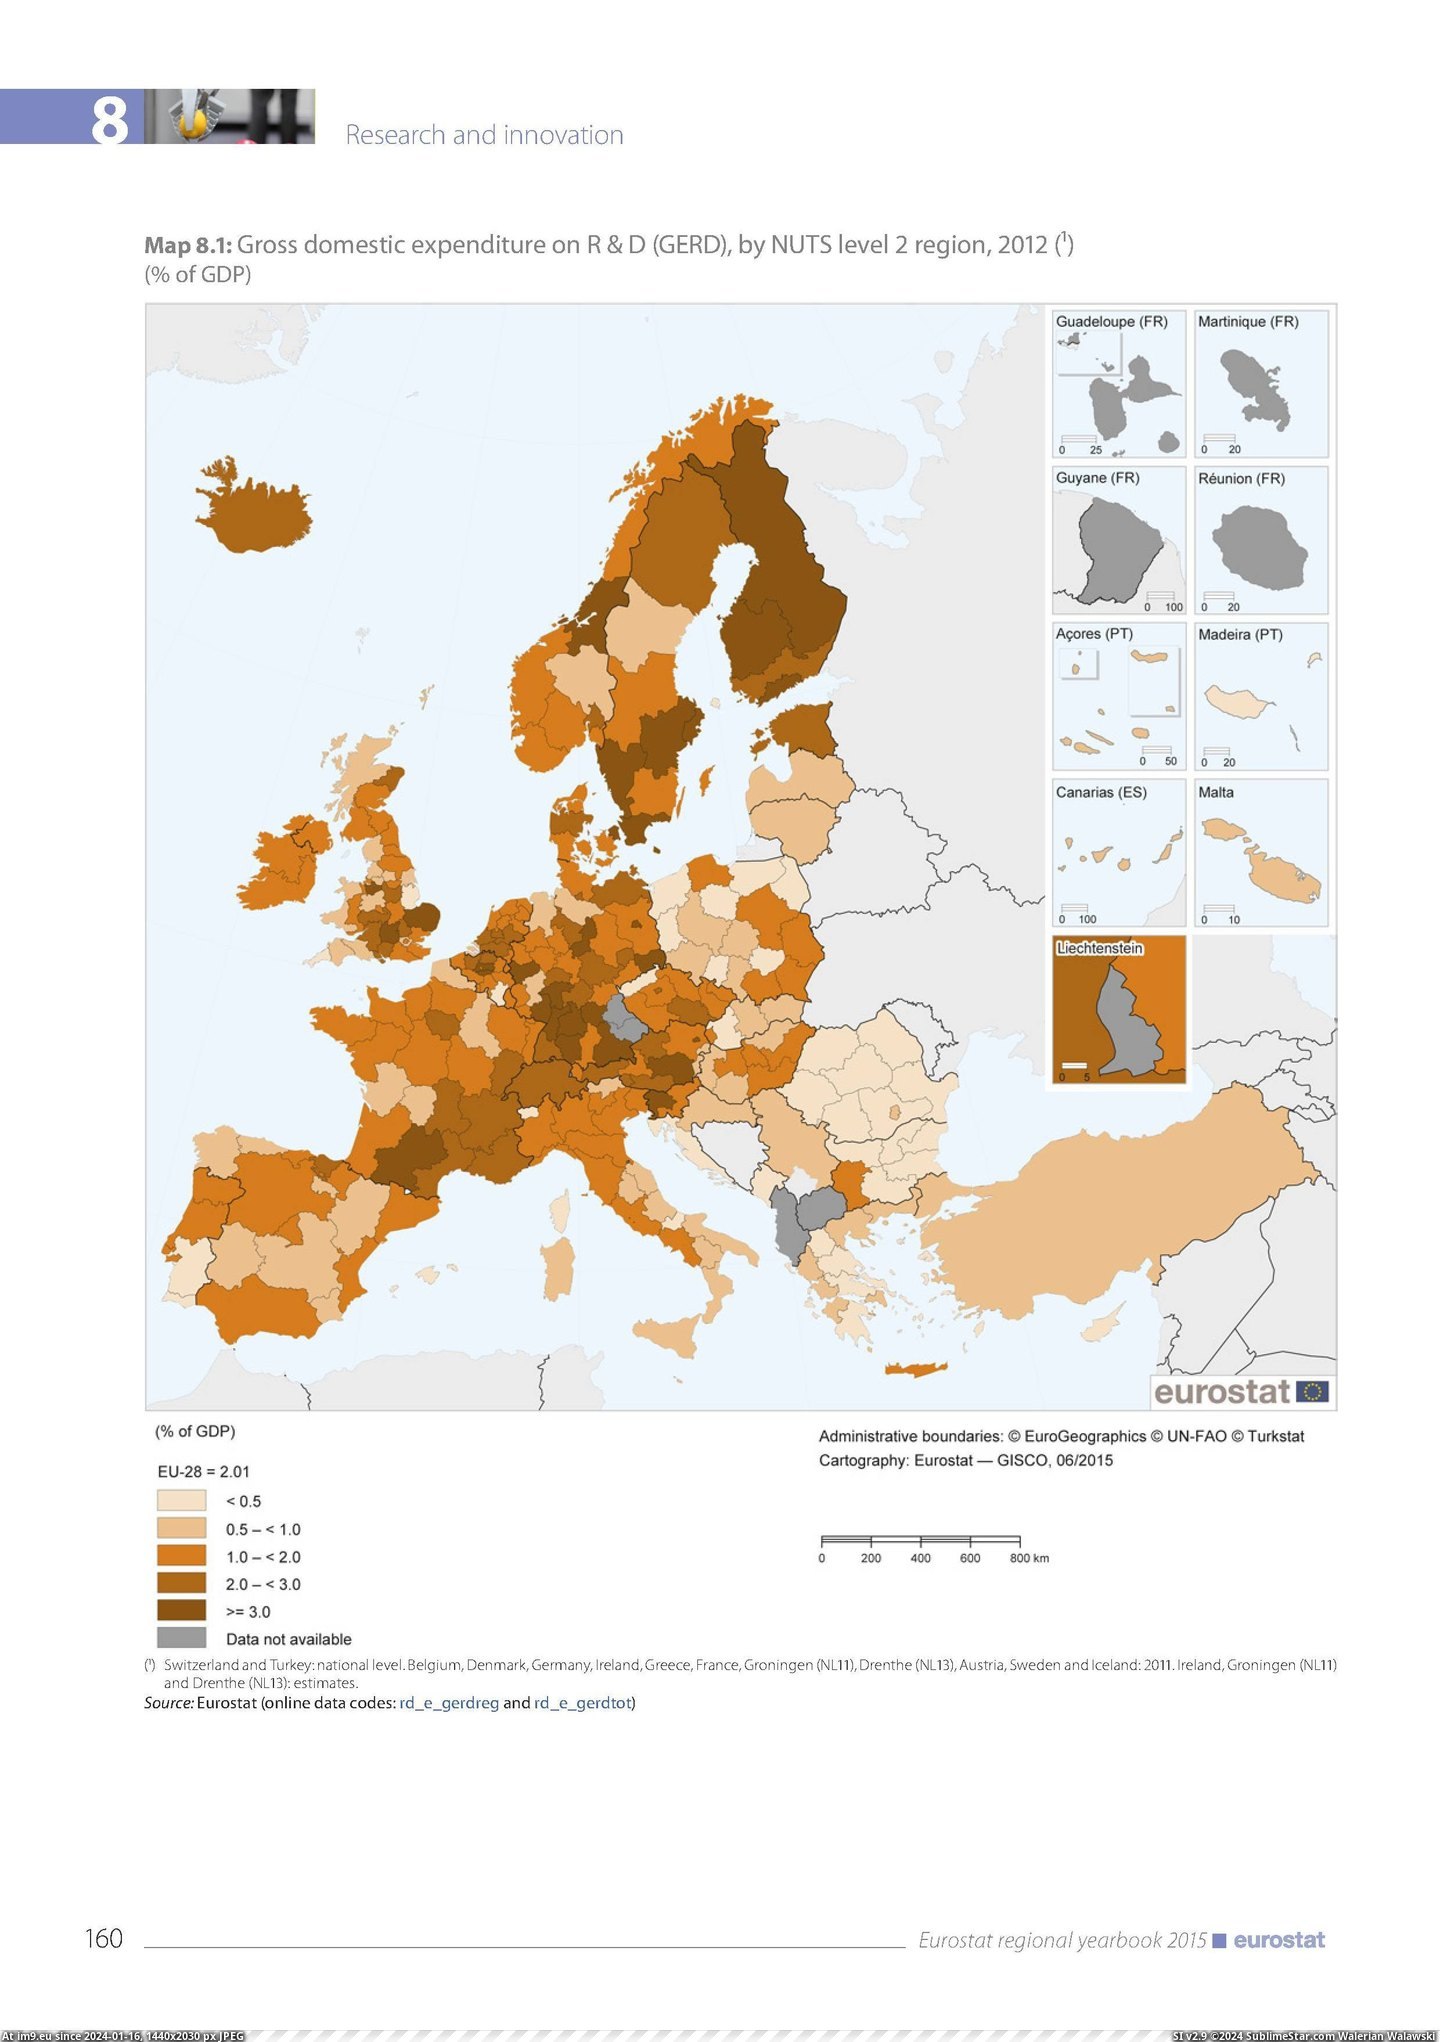 #Europe #Gross #Domestic #Gdp [Mapporn] Gross domestic expenditure on R&D in Europe, by NUTS2, 2012 (% of GDP) [2480x3508] Pic. (Изображение из альбом My r/MAPS favs))